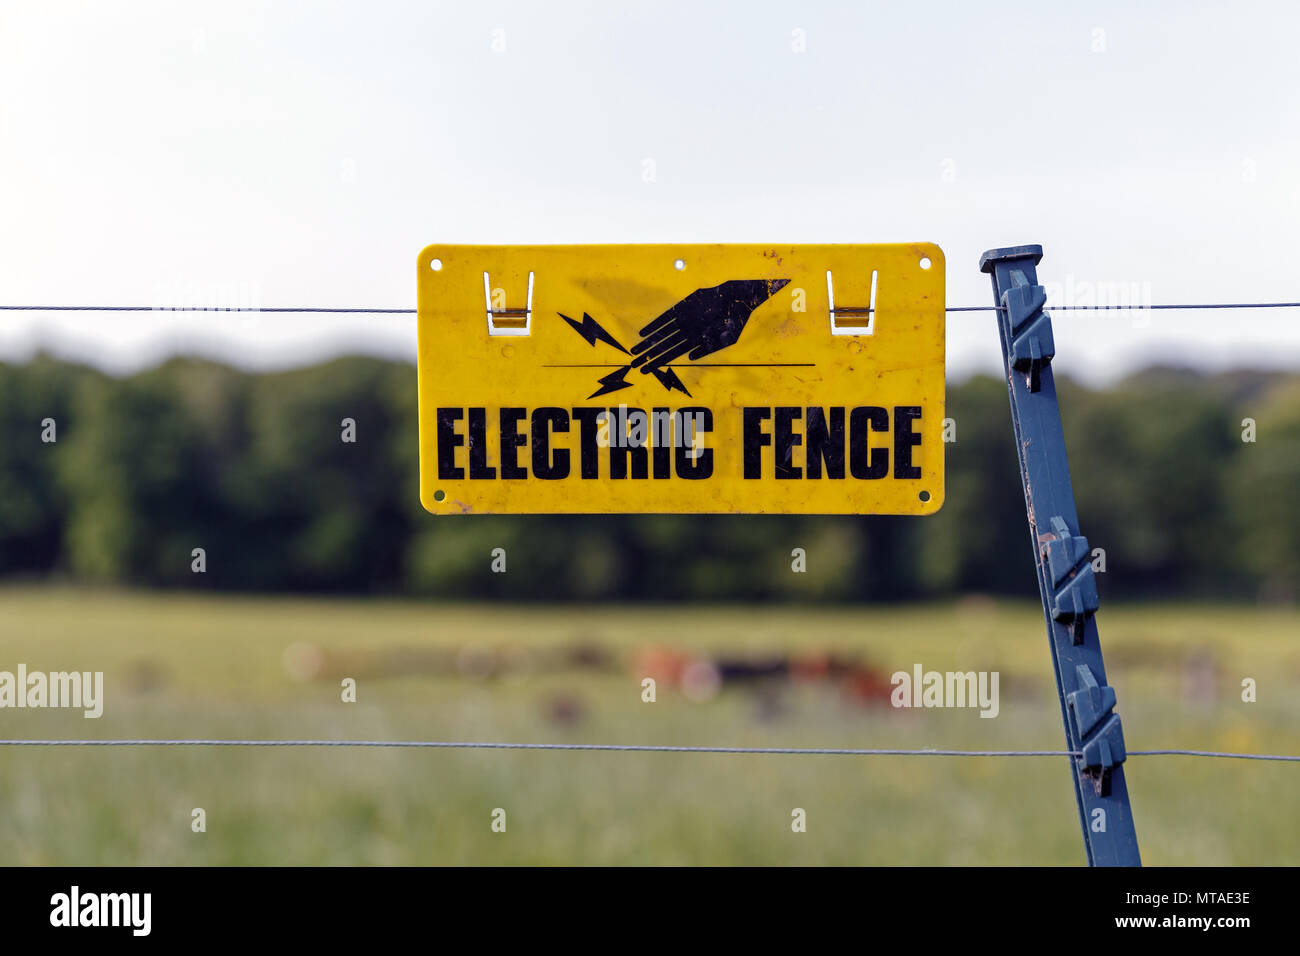 An electric fence in a field. Electrified fence, electric barrier, agricultural fencing. Stock Photo